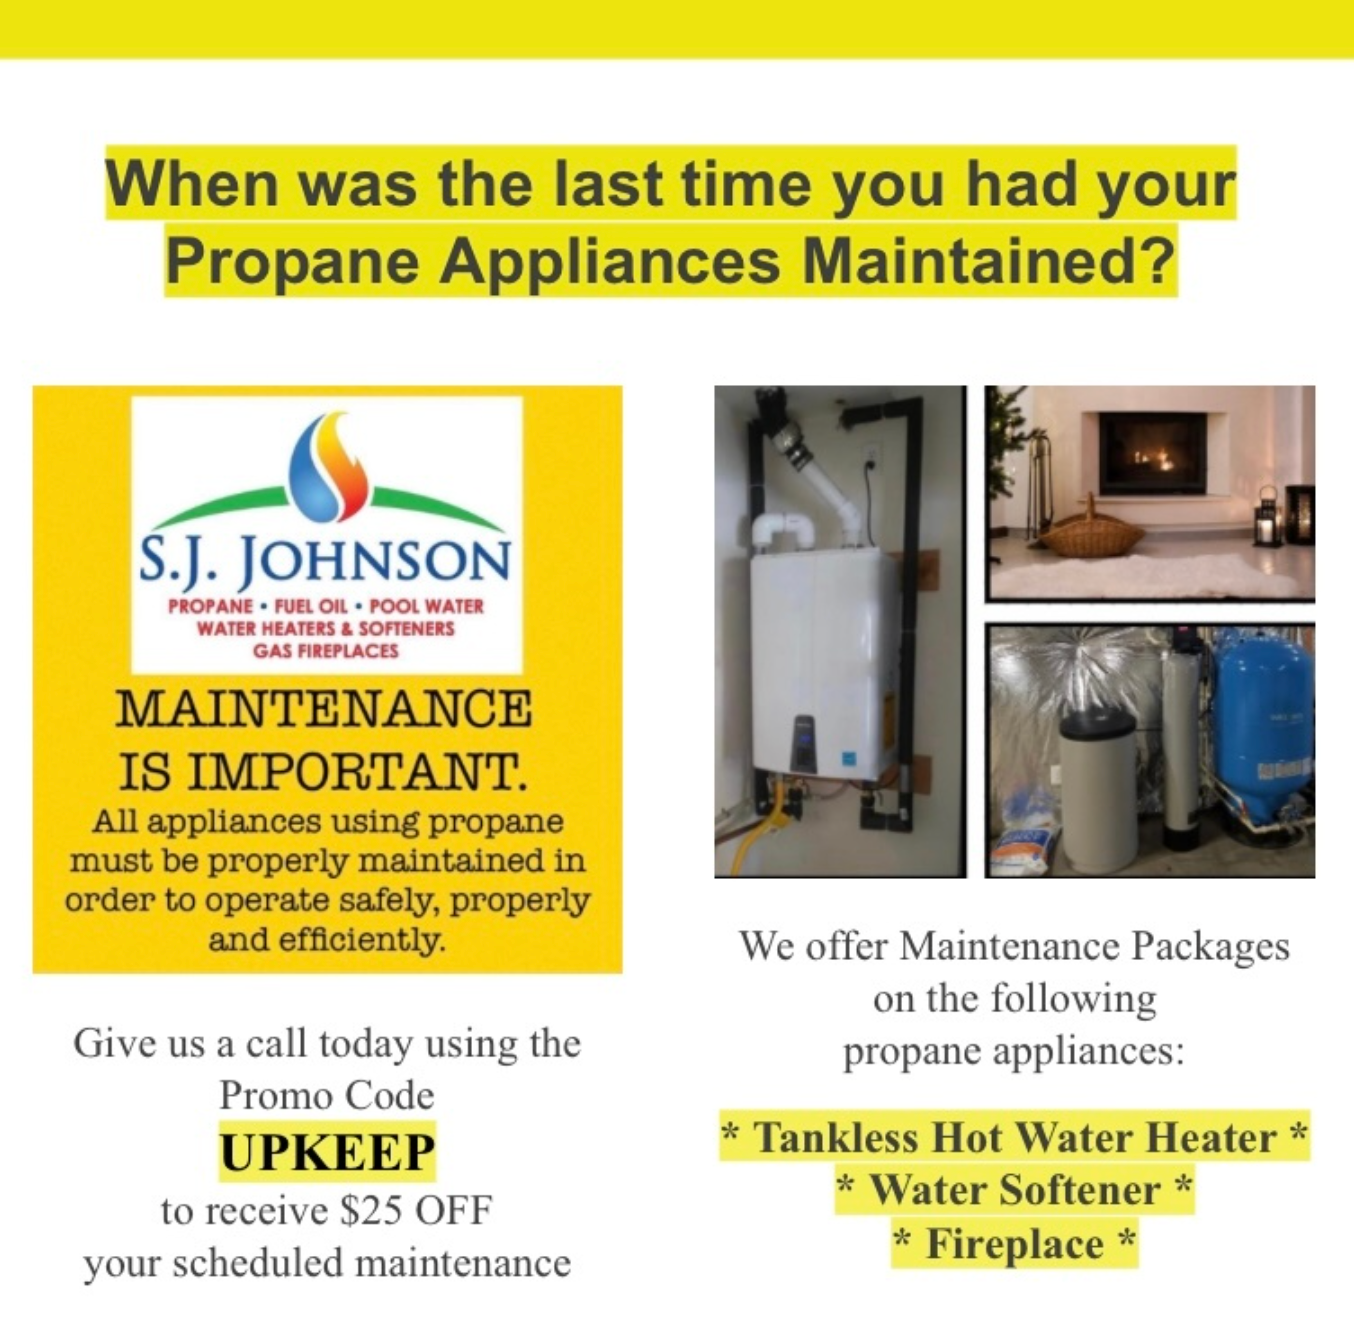 A coupon for s.j. johnson says when was the last time you had your propane appliances maintained